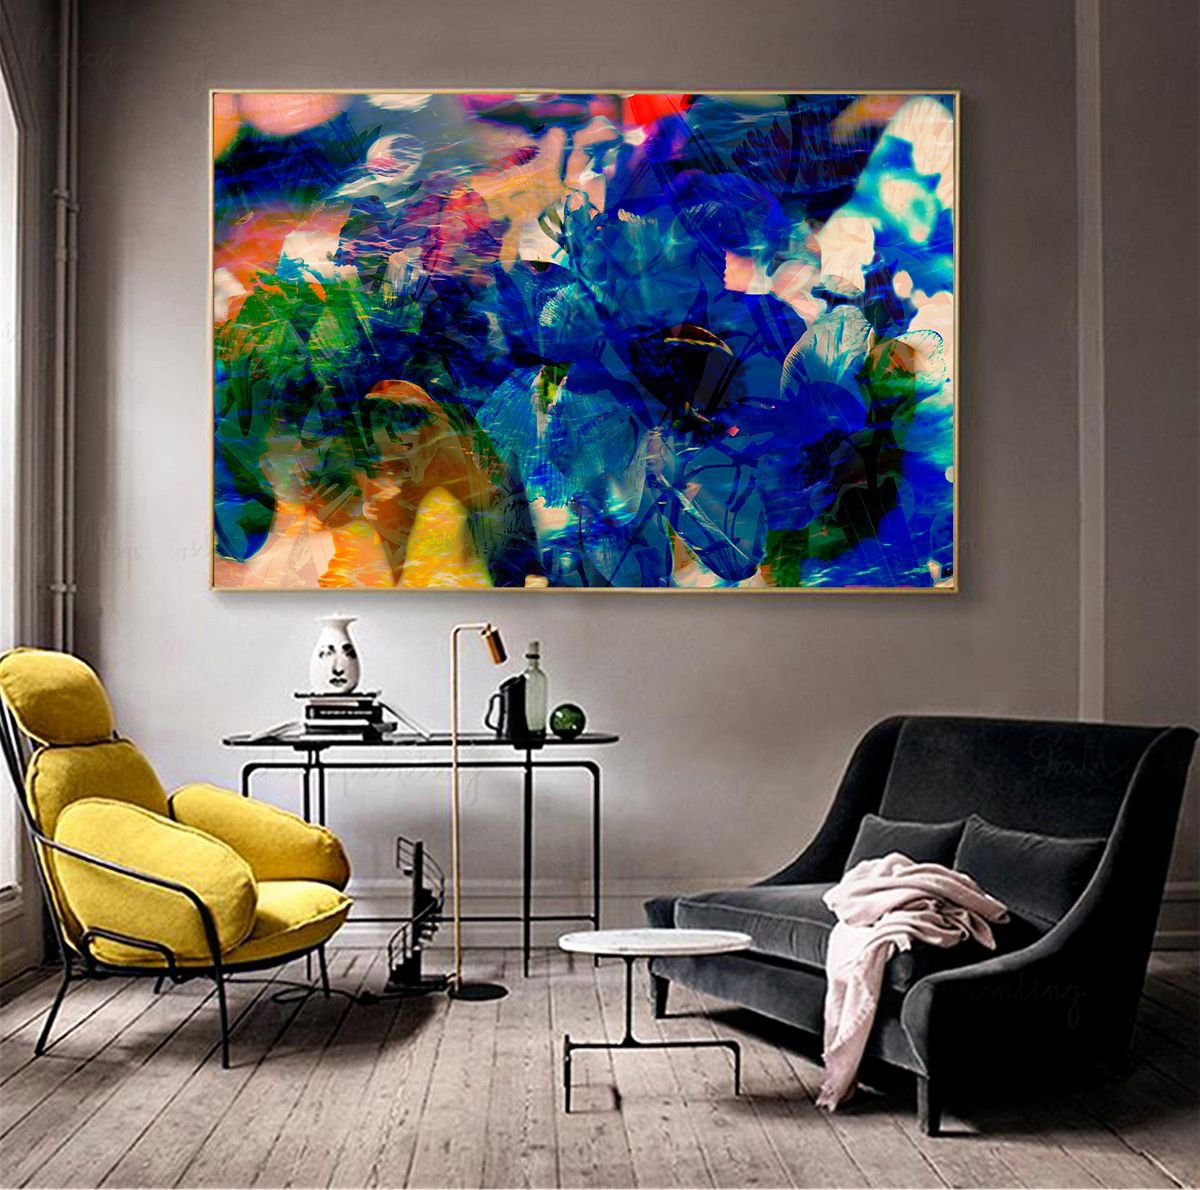 MEMORY FLOWERS # 321 (framed photo-painting) by LEV GORN